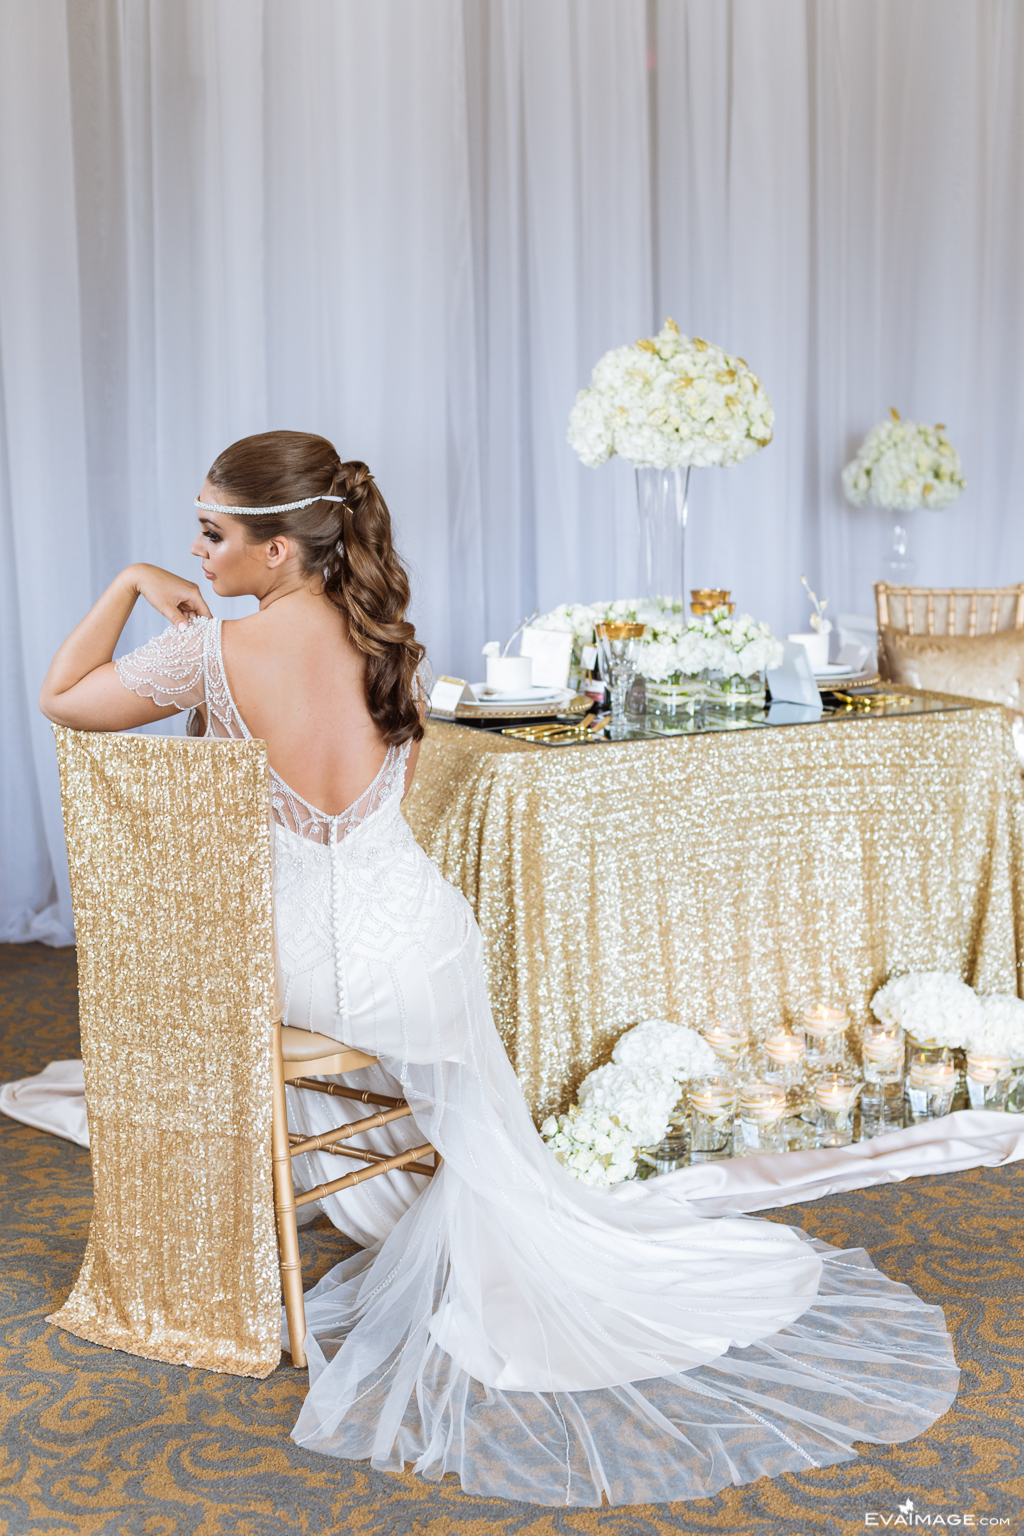  Savoy Event Venue Gold and White Wedding Inspiration 